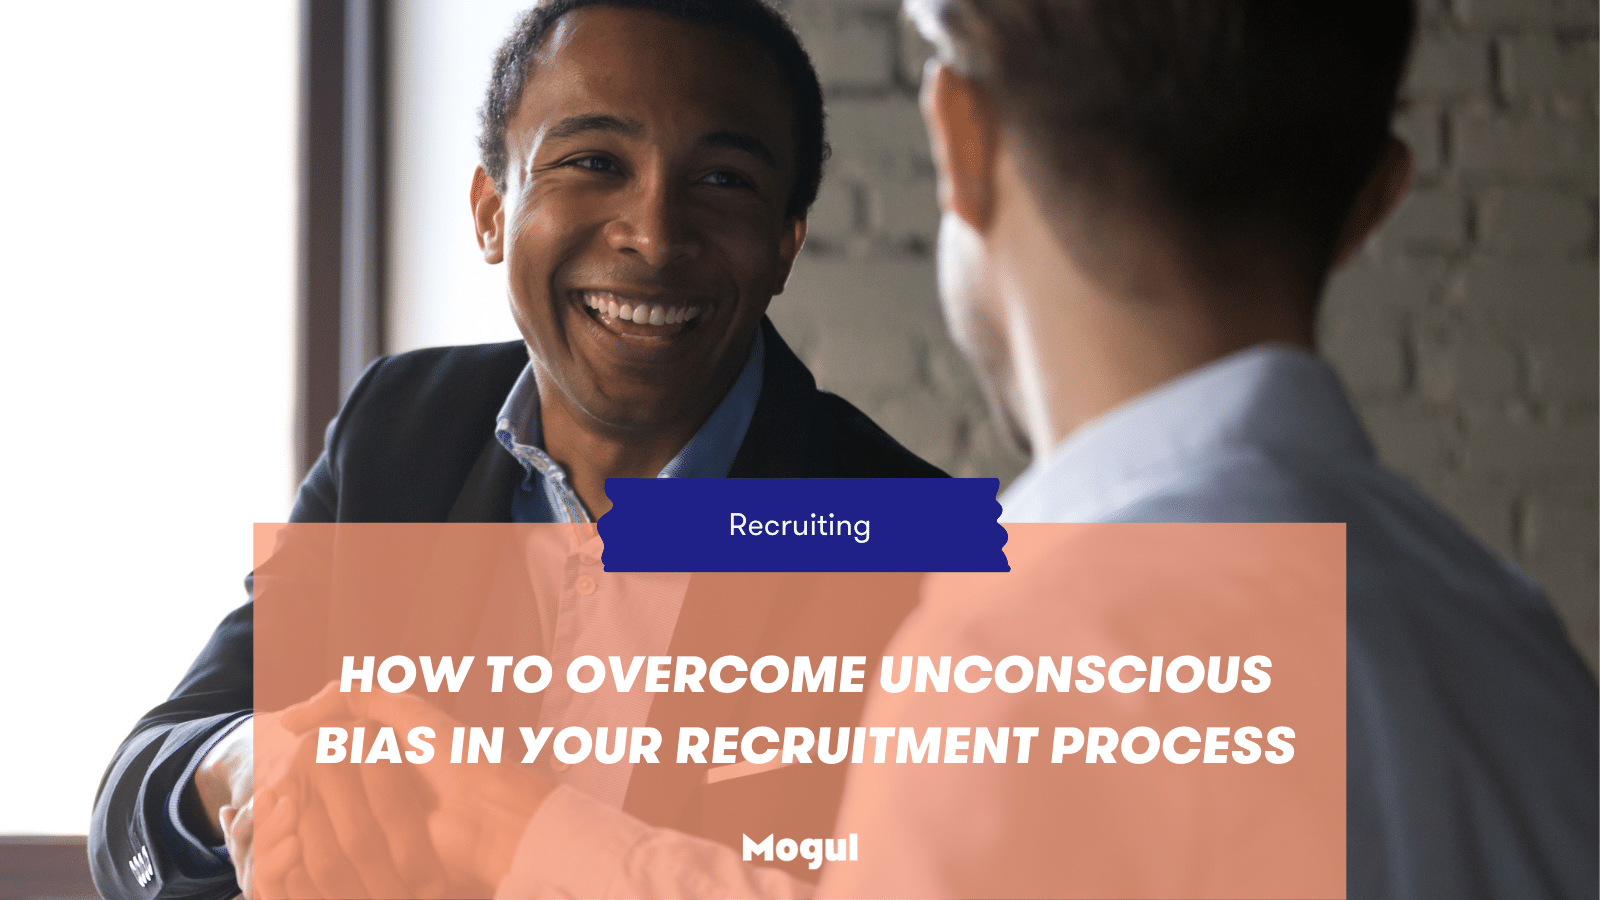 How to overcome unconscious bias in your recruitment process